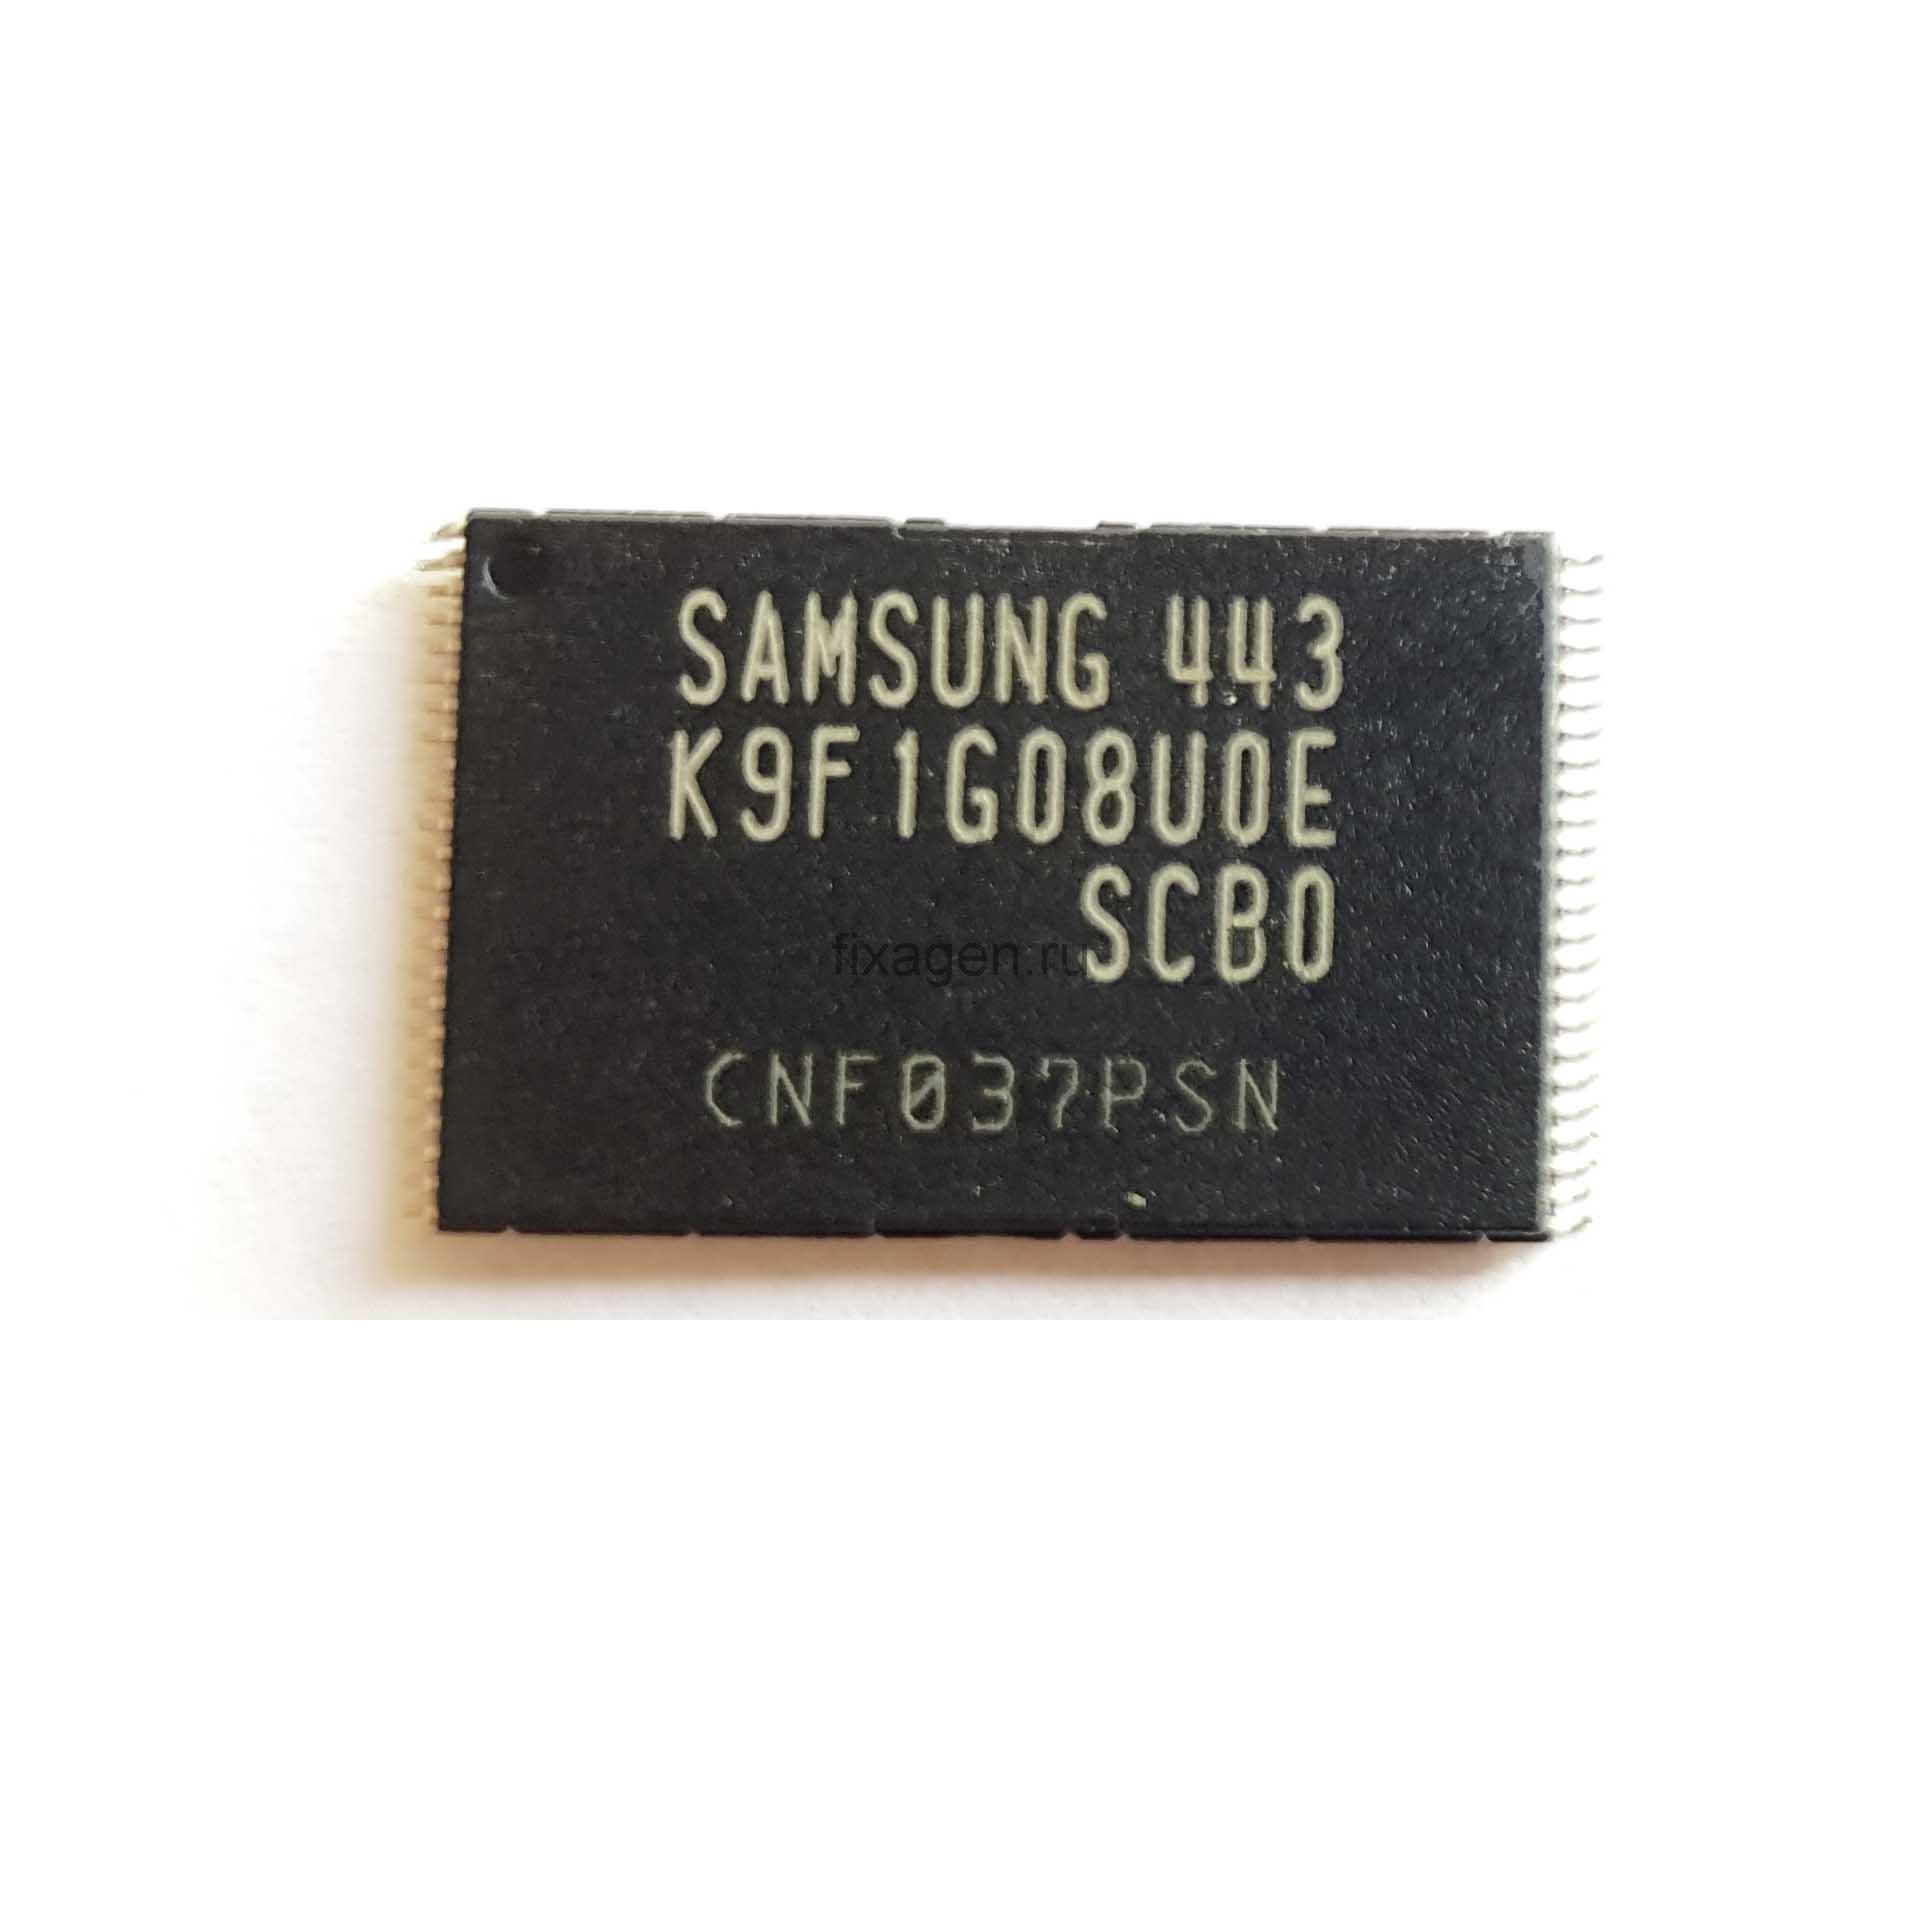 samsung clp-415nw driver for mac